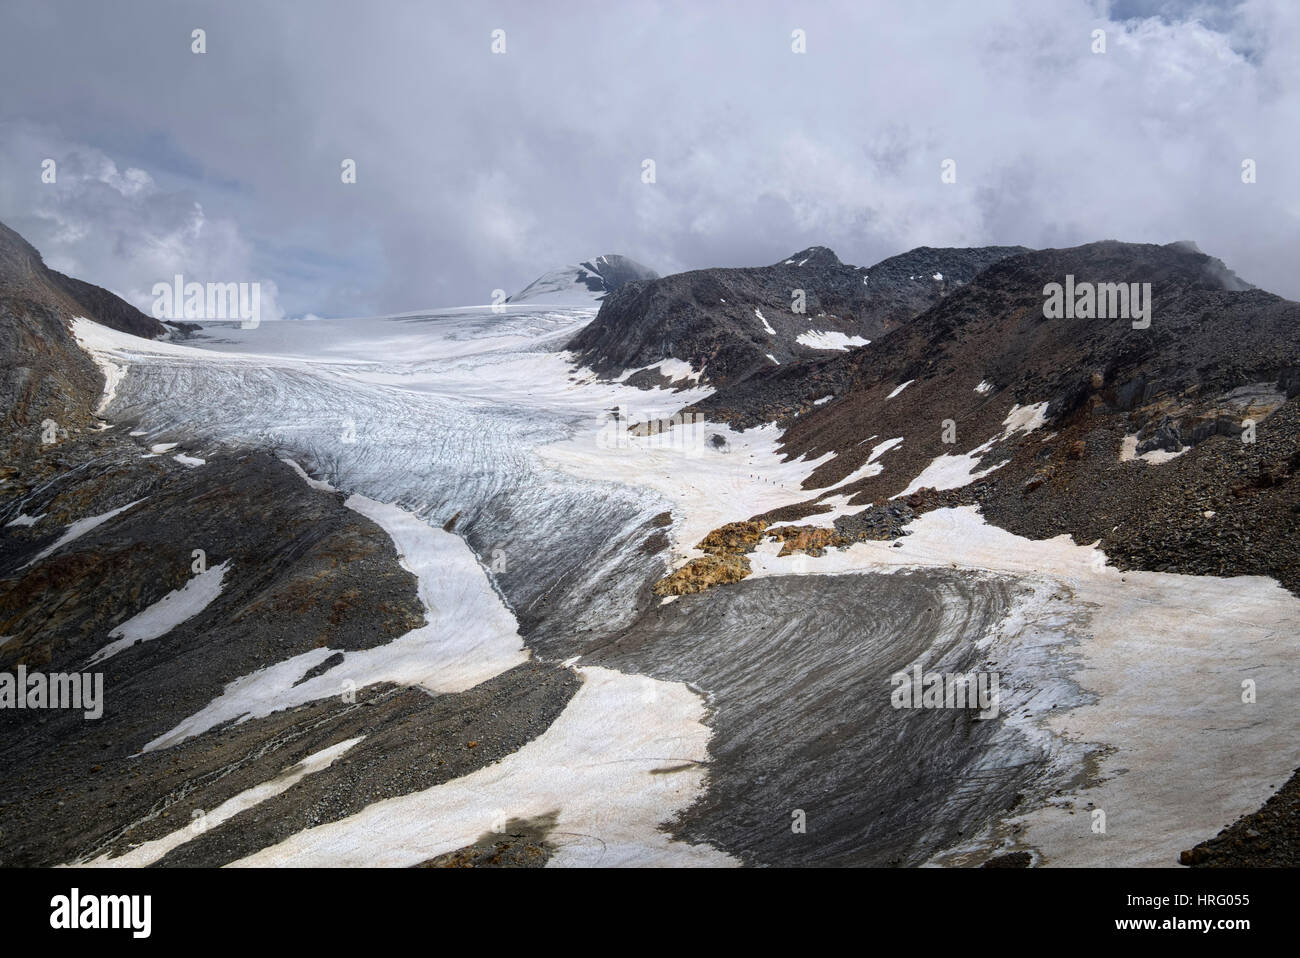 Niederjochferner alias Similaun glacier partly cloudy and sunny at the border between Oetztal, Austria and Schnalstal, South Tyrol, Italy Stock Photo